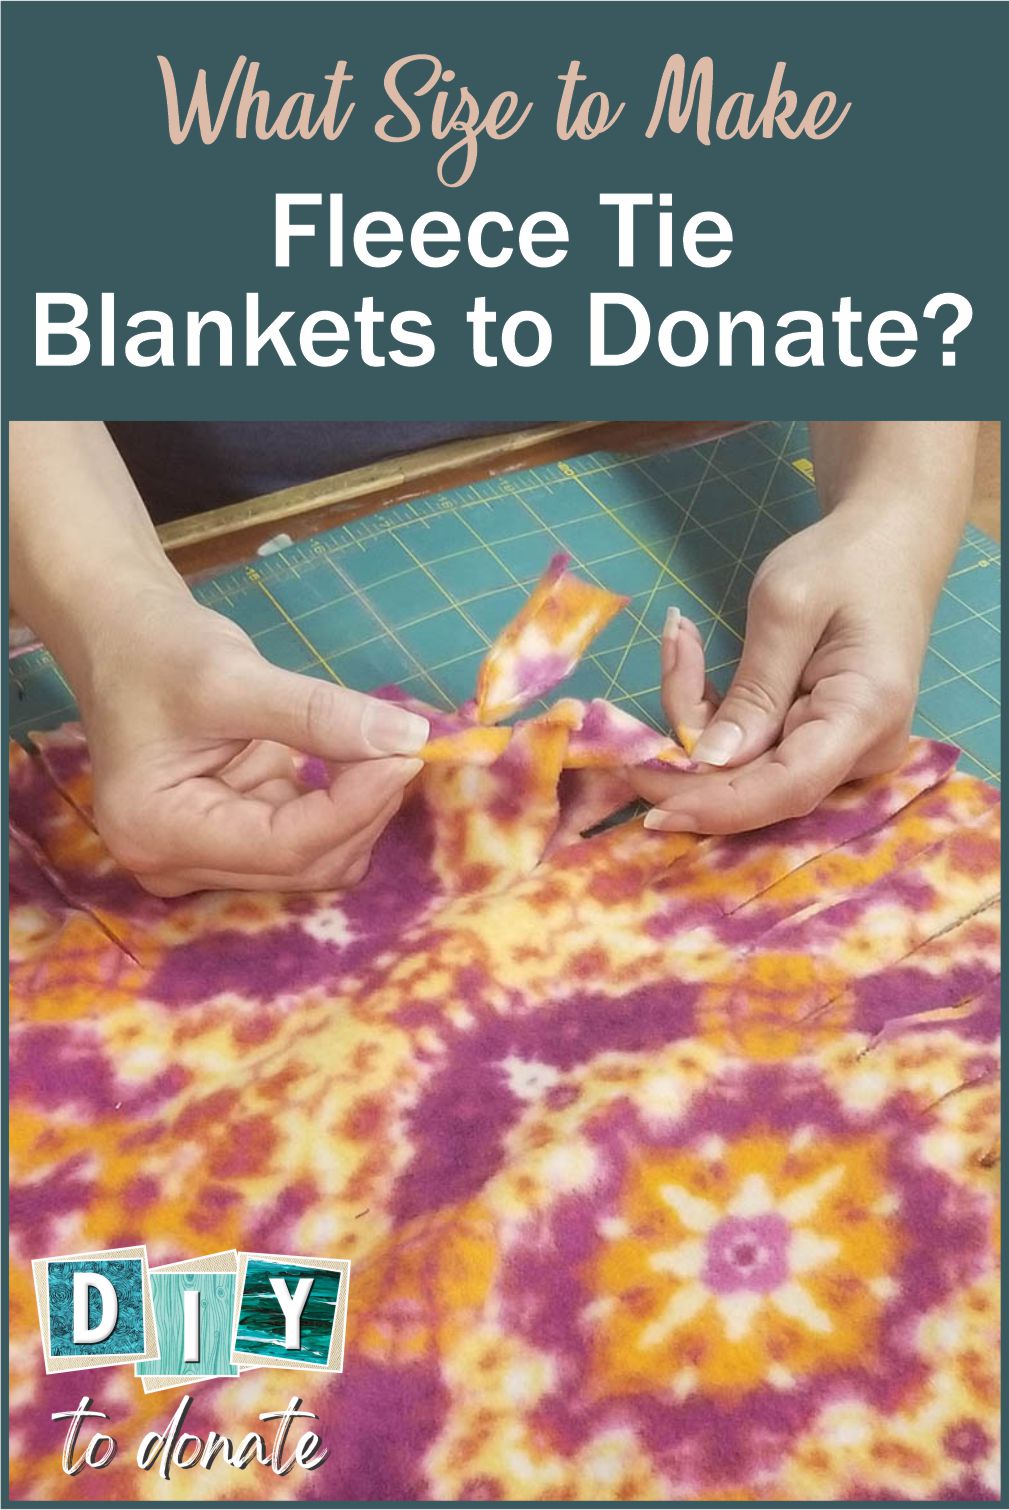 Use our handy size chart and step-by-step instructions to make fleece tie blankets with your group and find out where you can donate them. #diytodonate #diy #donate #giveback #nosew #nosewblankets #fleecetieblankets #printable